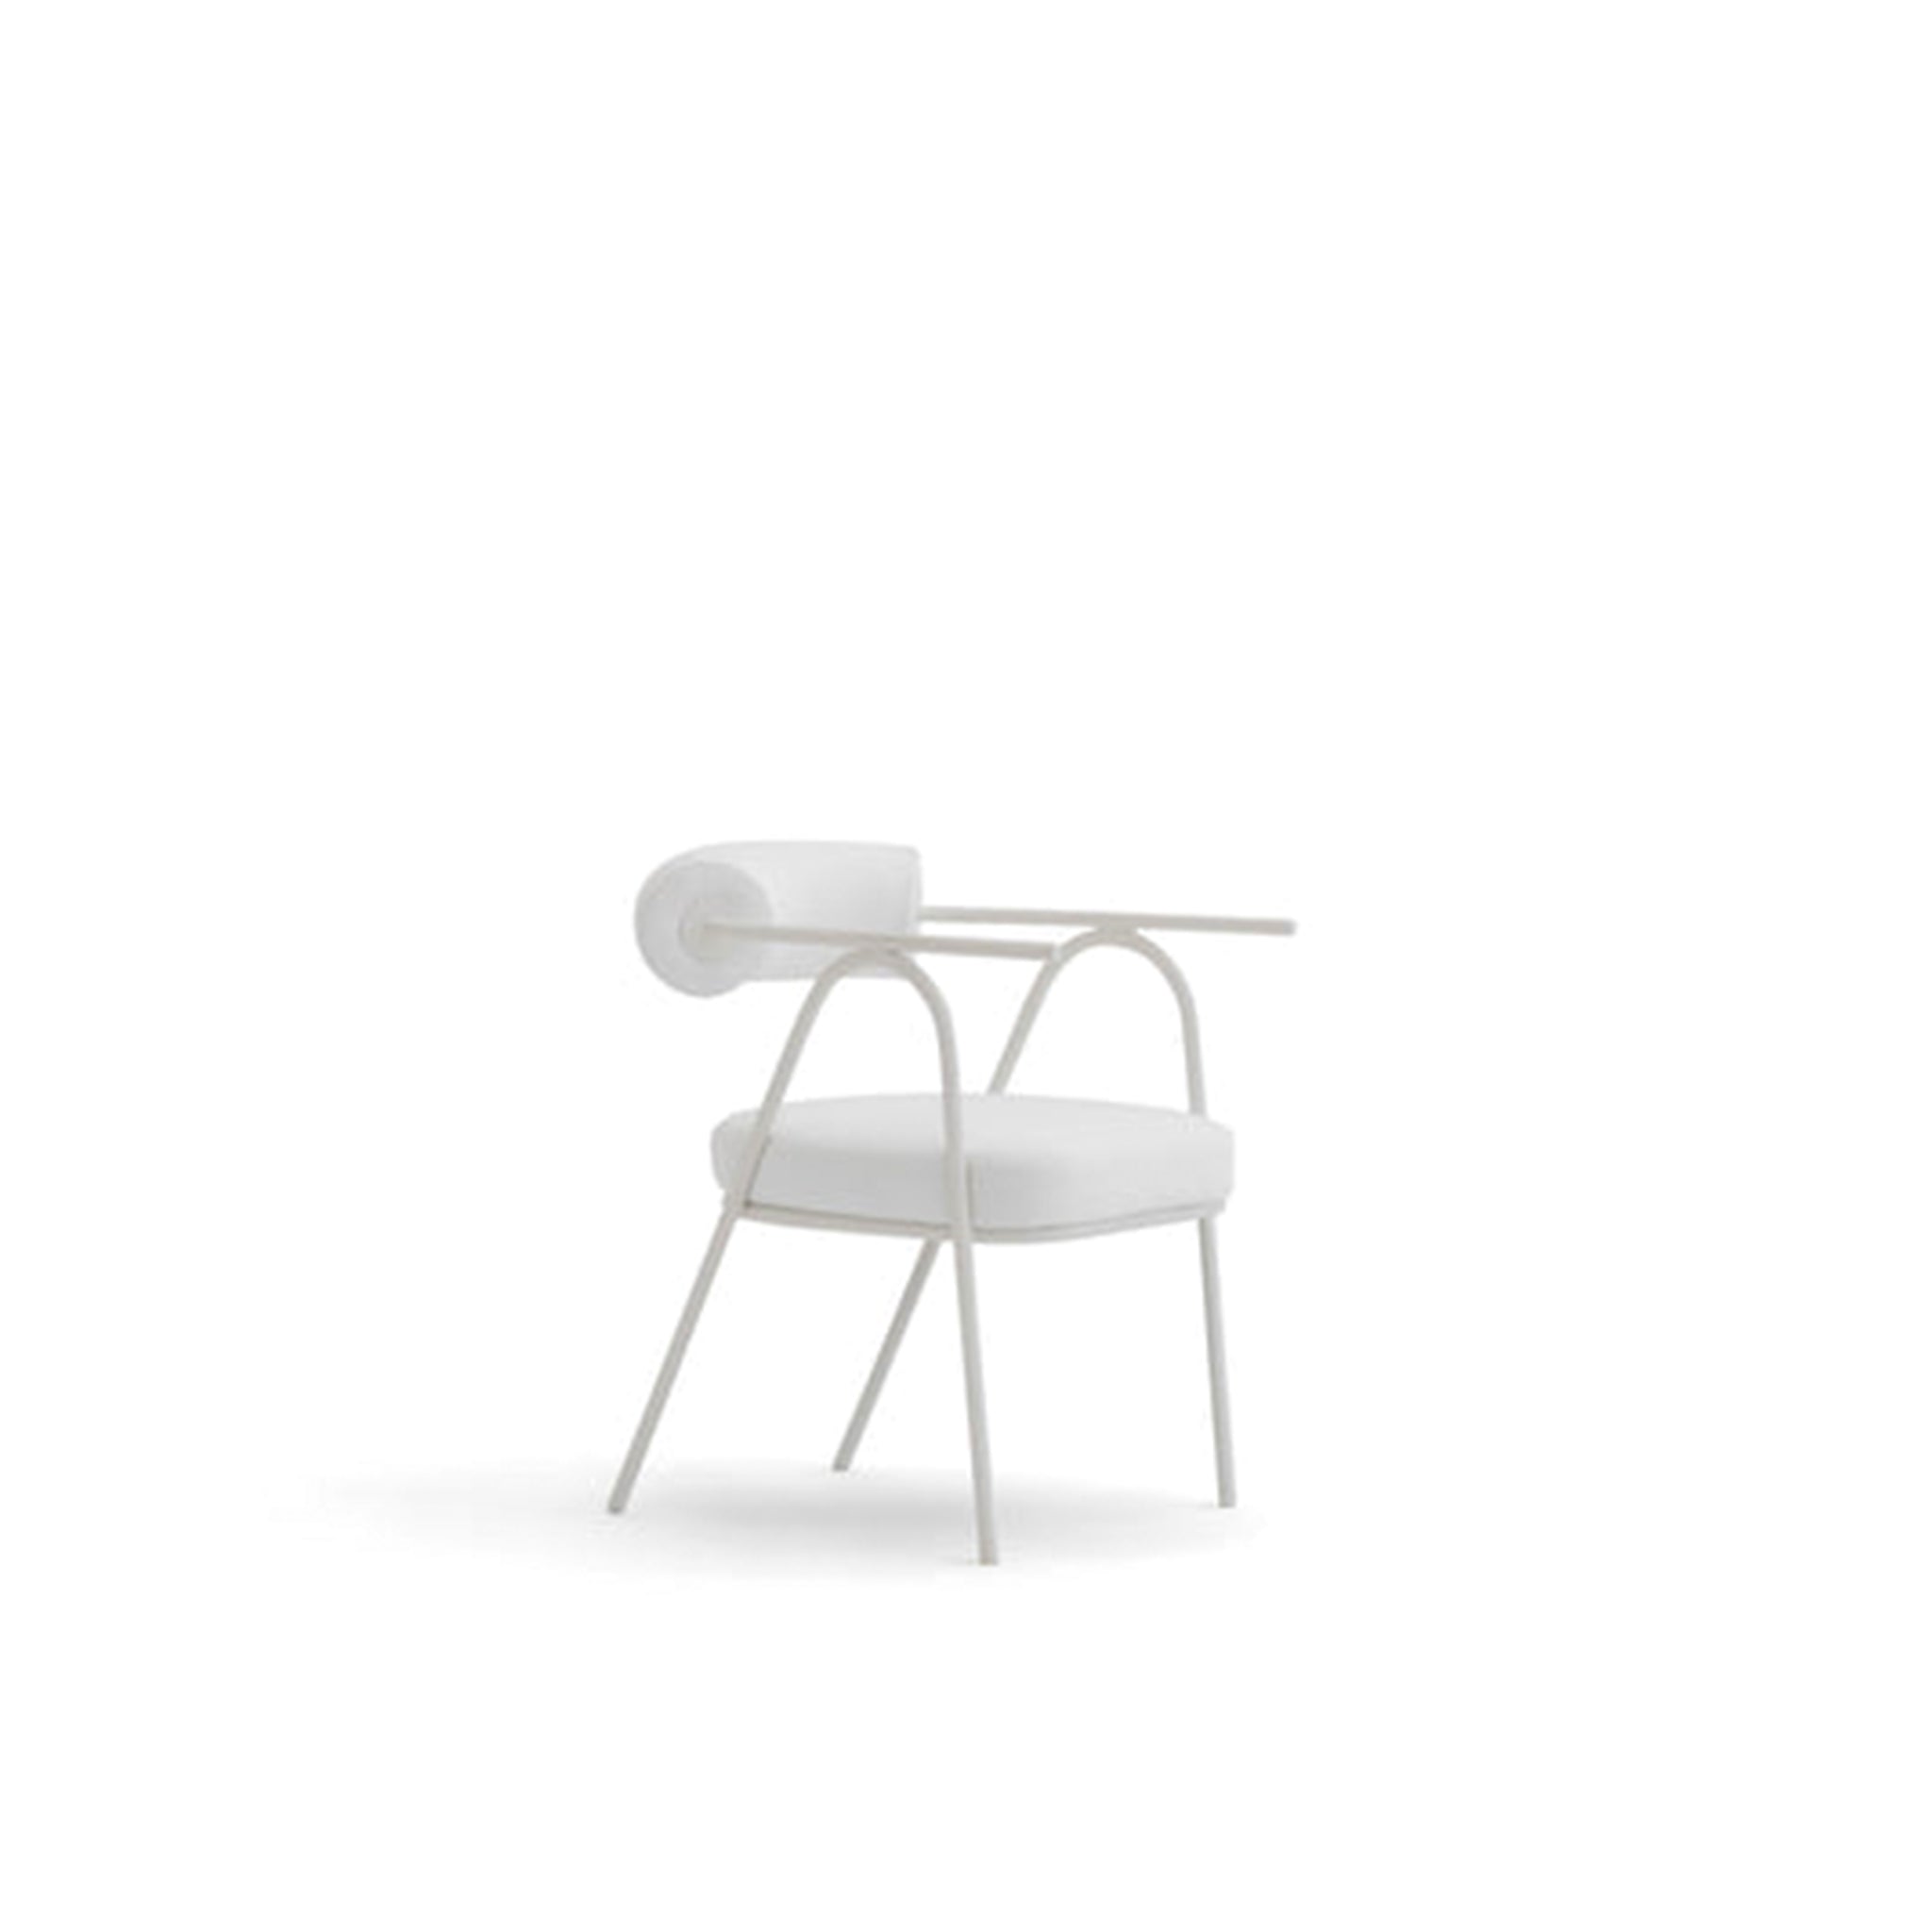 The Wanda Dining Chair featuring a minimalist white metal frame, curved backrest with a cylindrical cushion, and a padded seat for a modern, elegant dining experience.